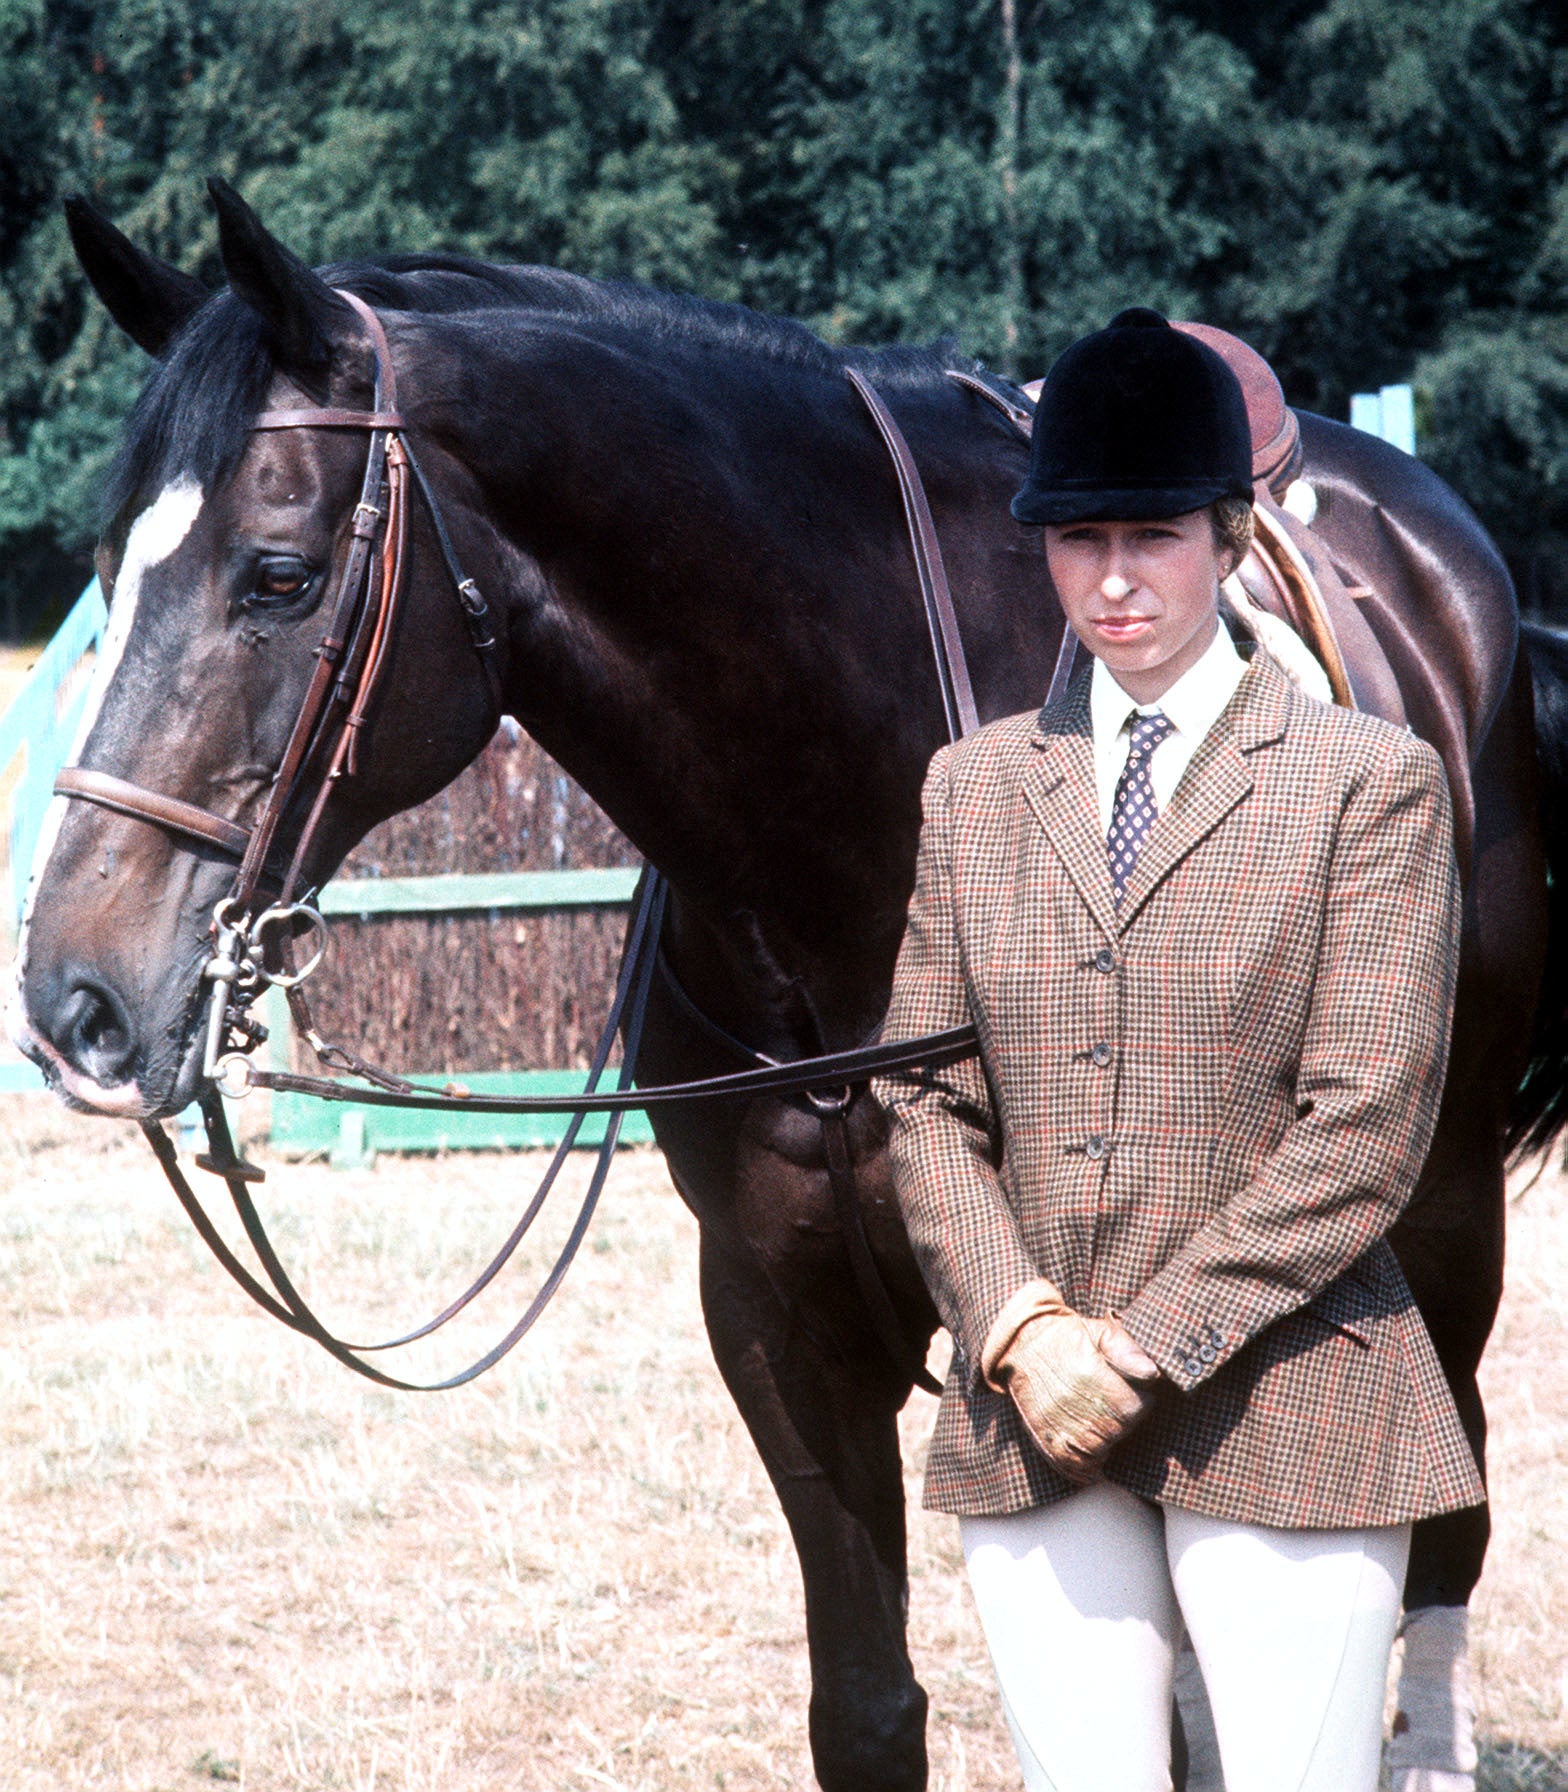 Princess Anne’s love of horses took her to the Olympics in 1976.